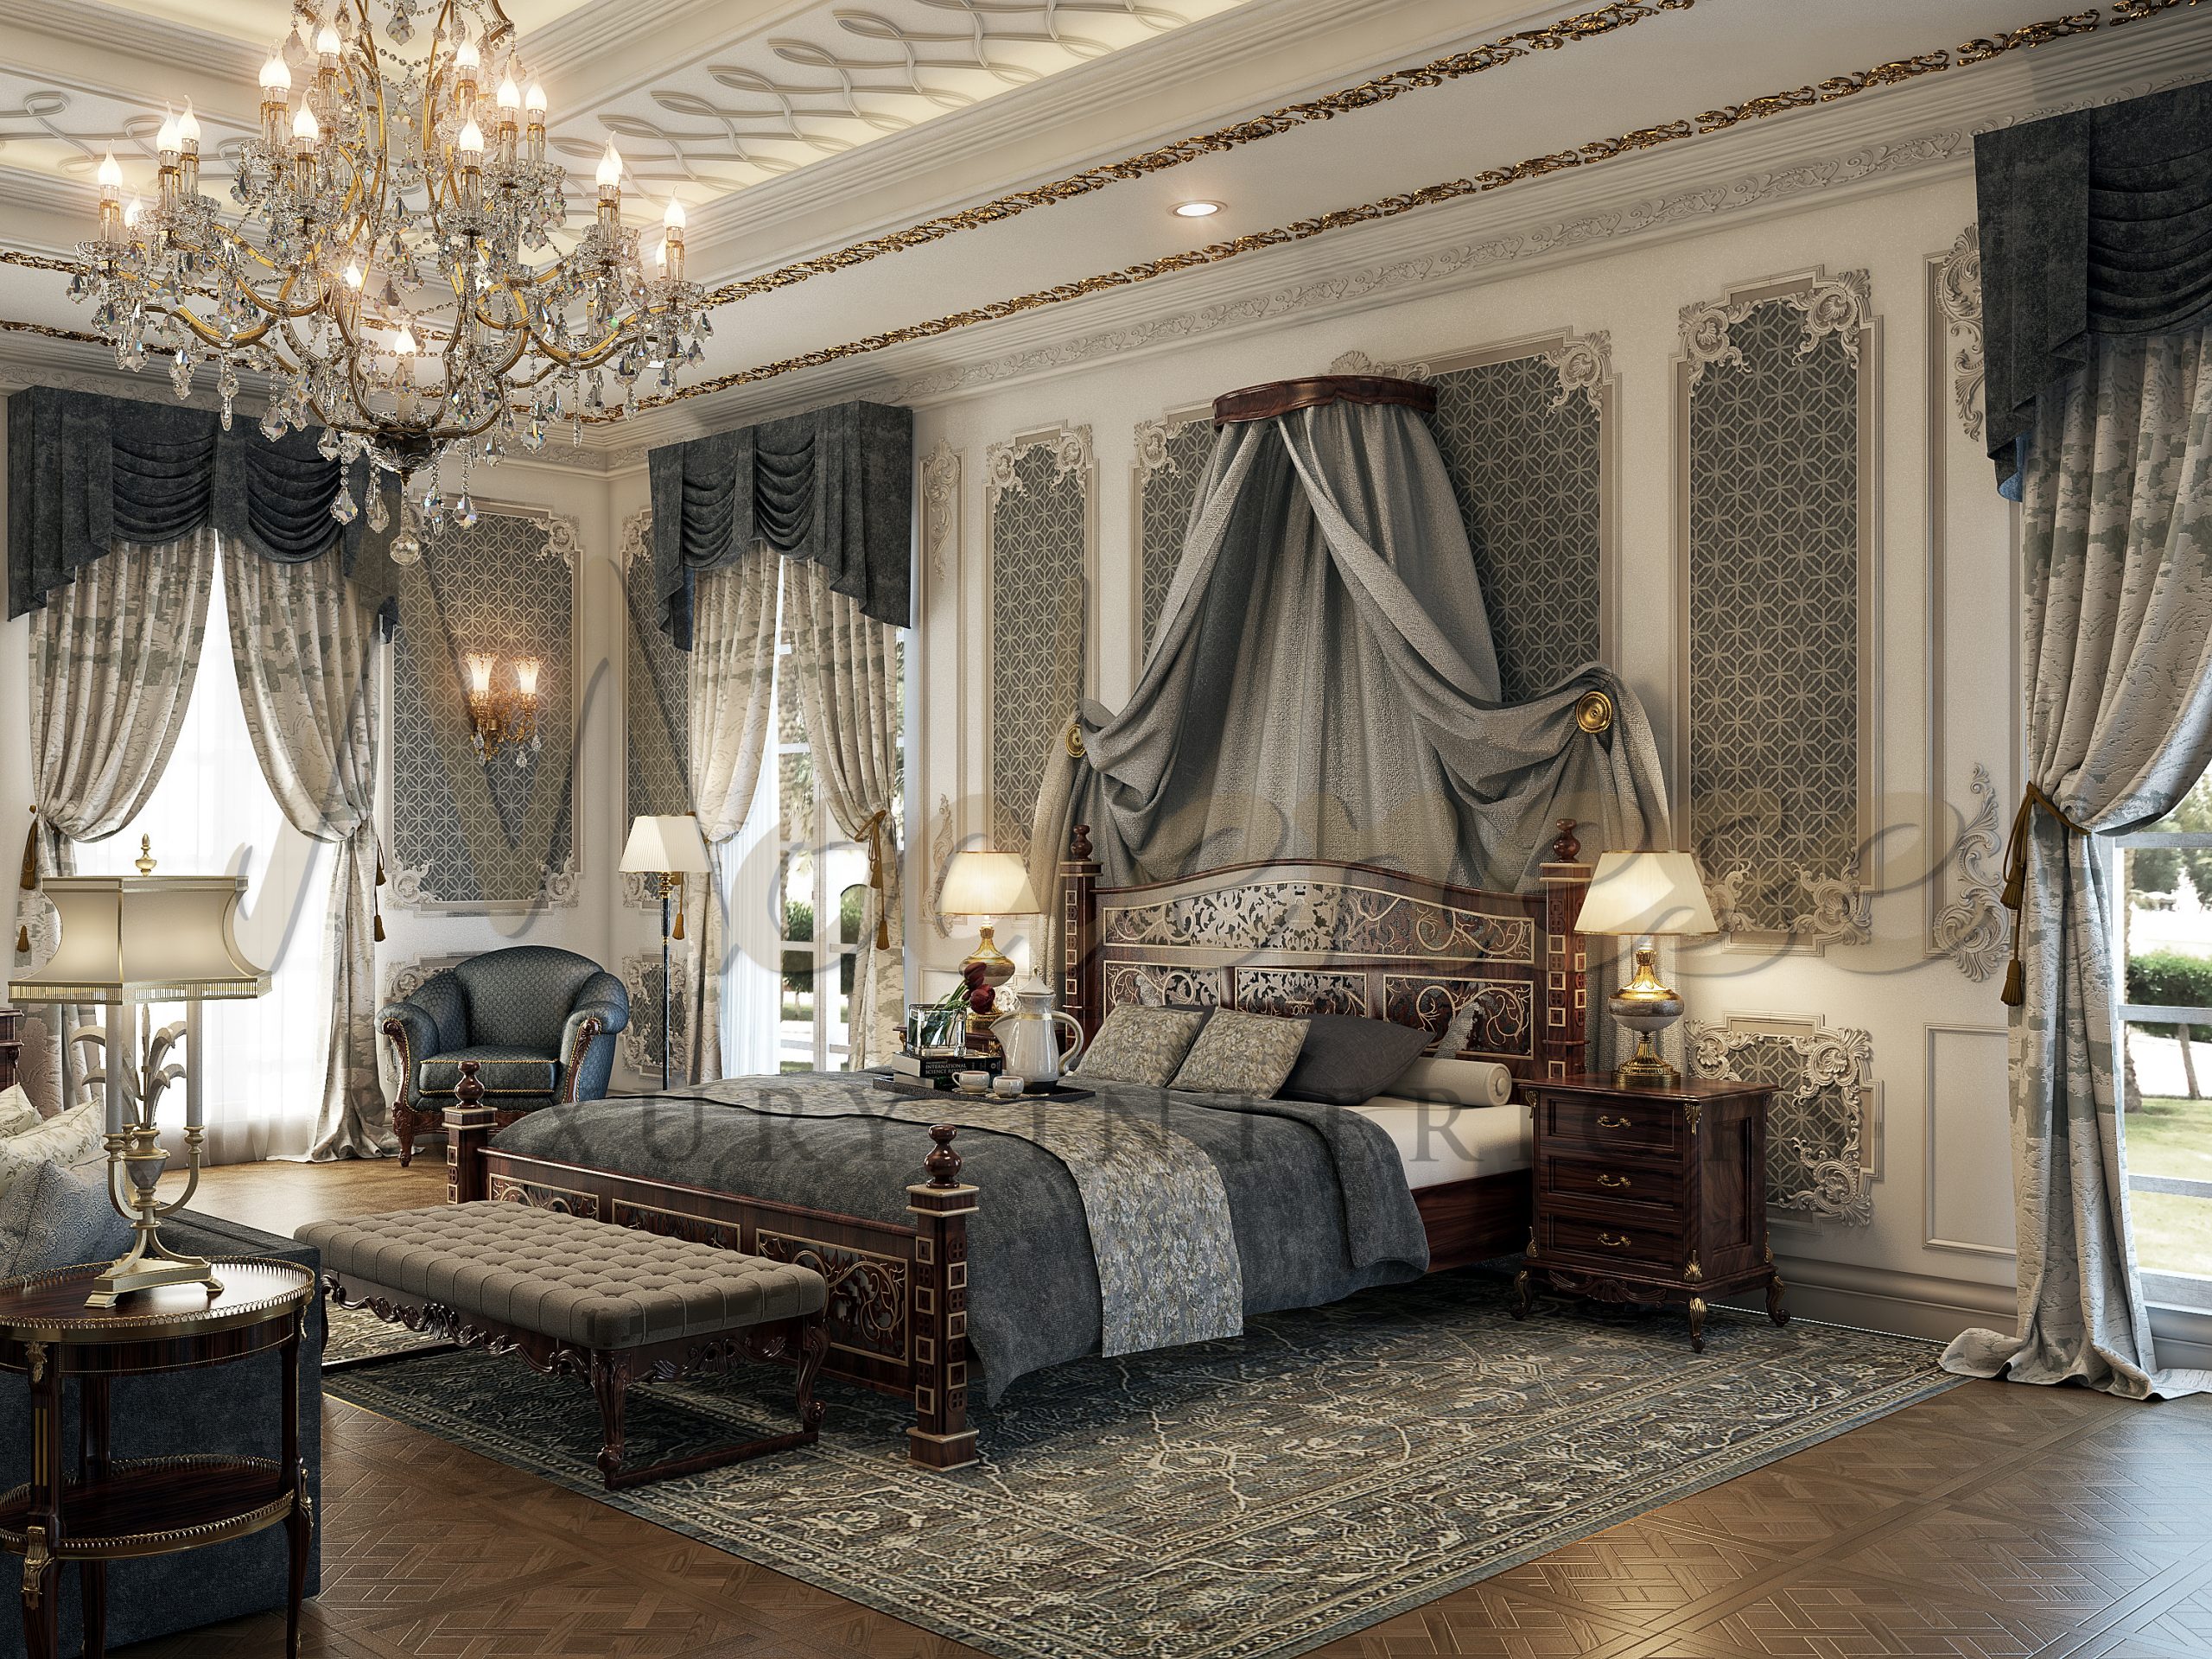 Elegant design of classic luxury bedroom, top luxury interiors, best furniture, made in Italy, furniture manufacturing. High-end quality,precious fabrics accurately selected.